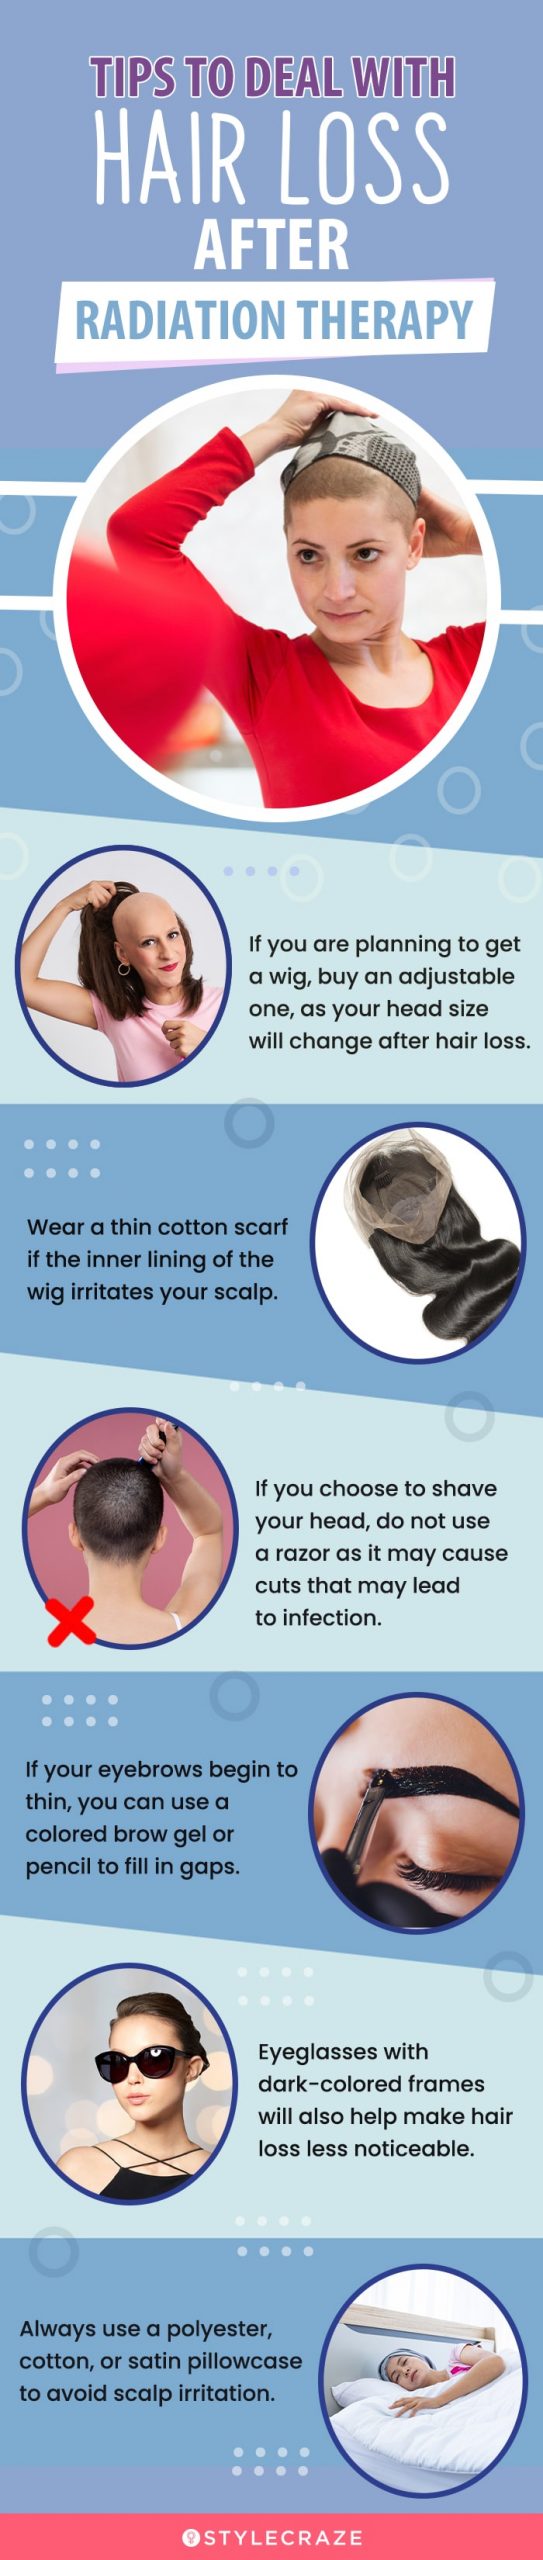 tips to deal with hair loss after radiation therapy (infographic)